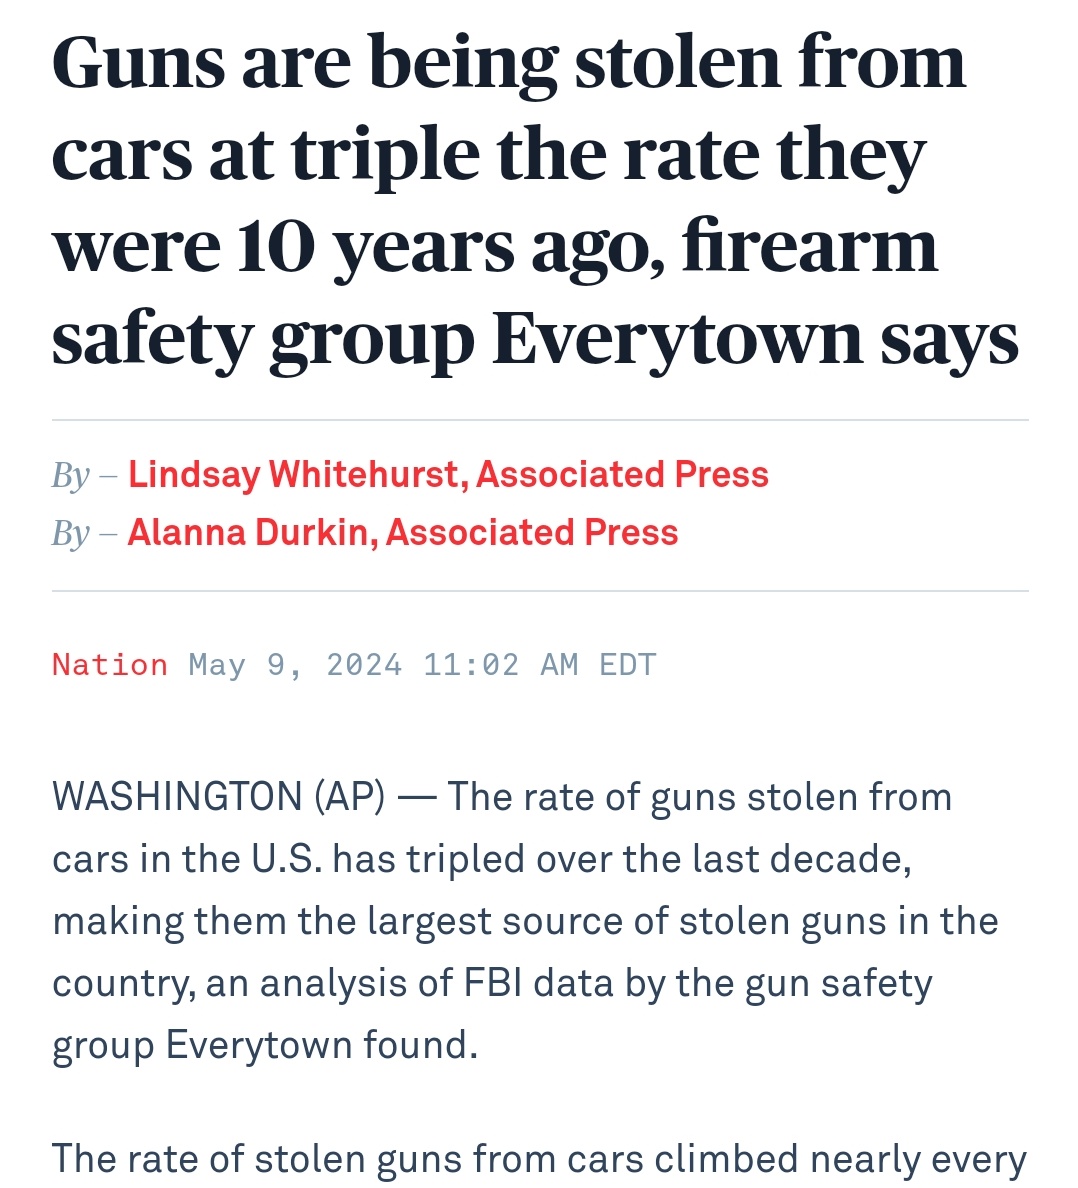 Don't leave your guns in the car.